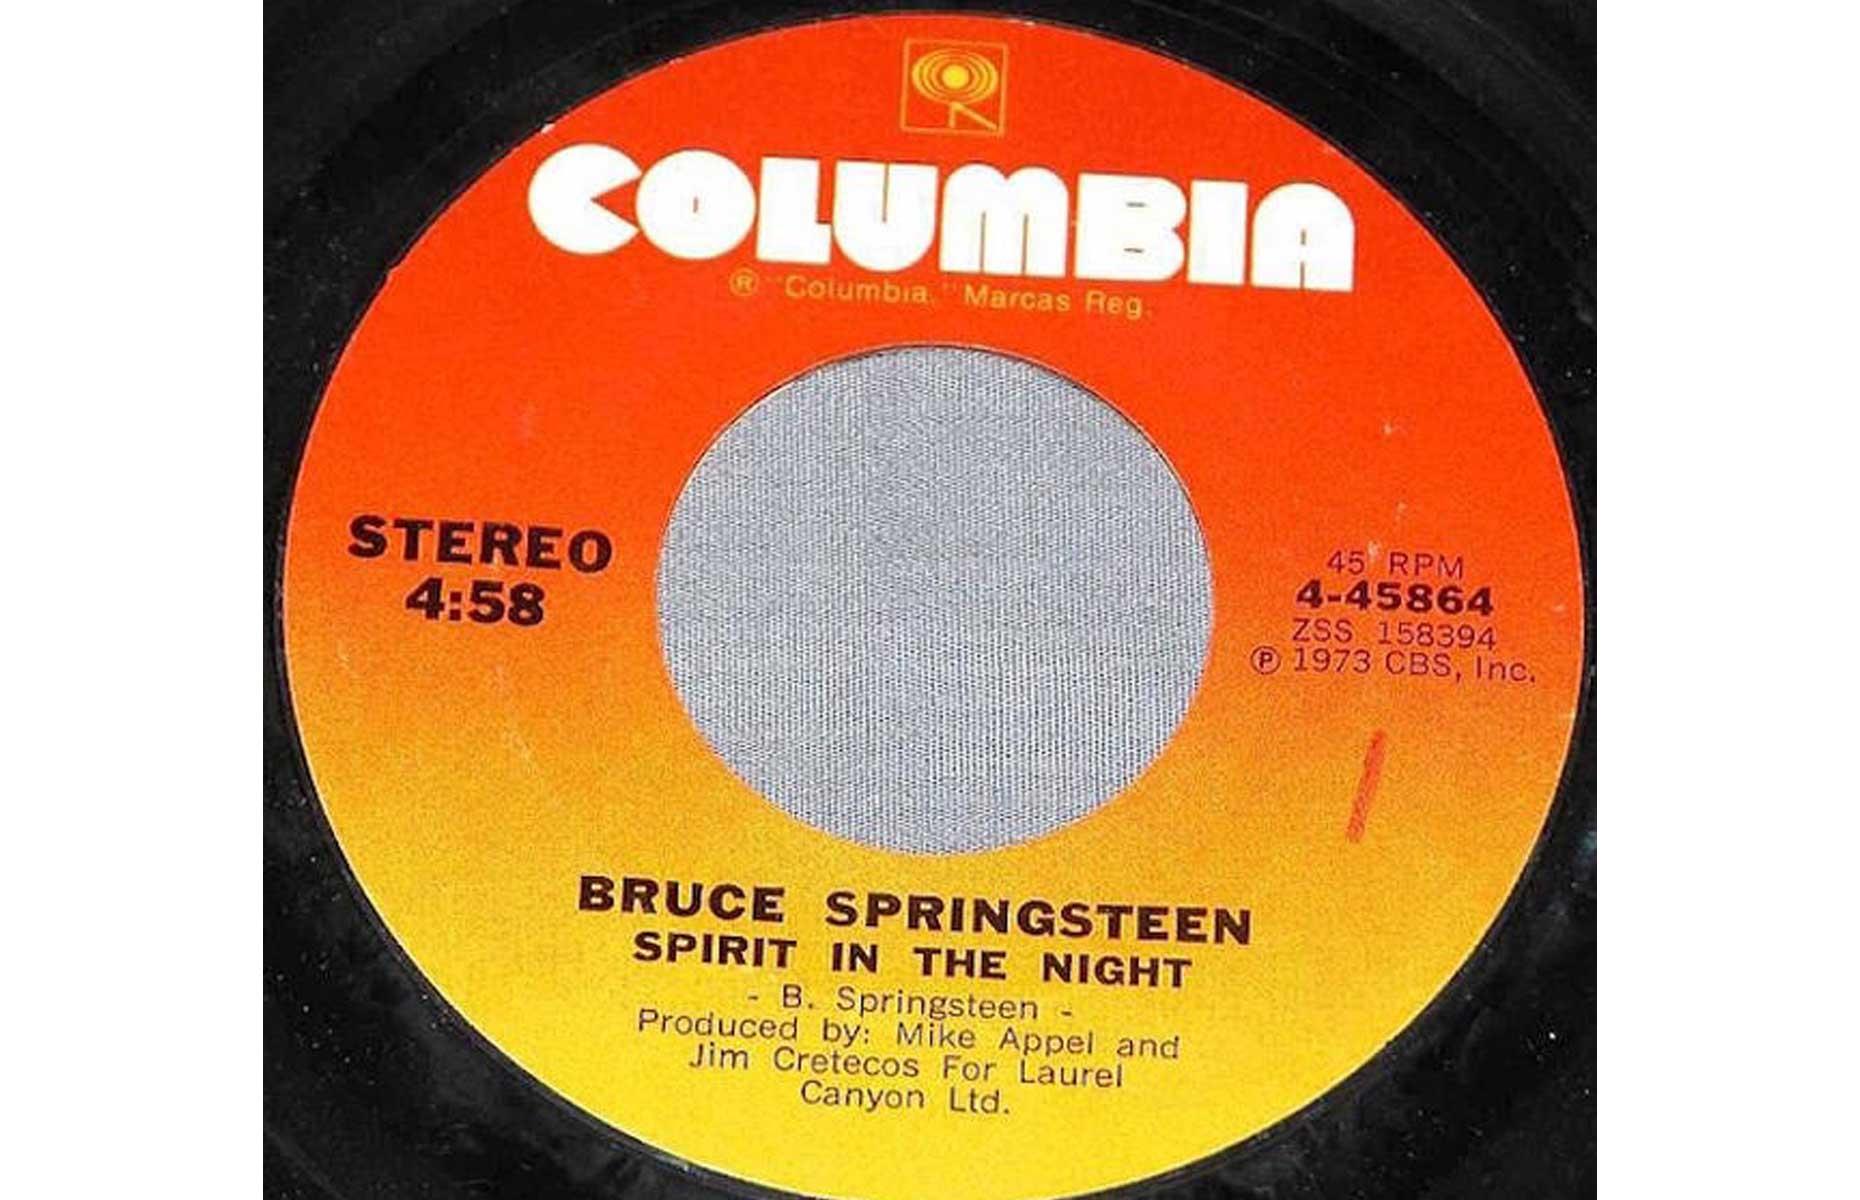 Bruce Springsteen – Spirit In the Night: up to $5,100 (£4,333)